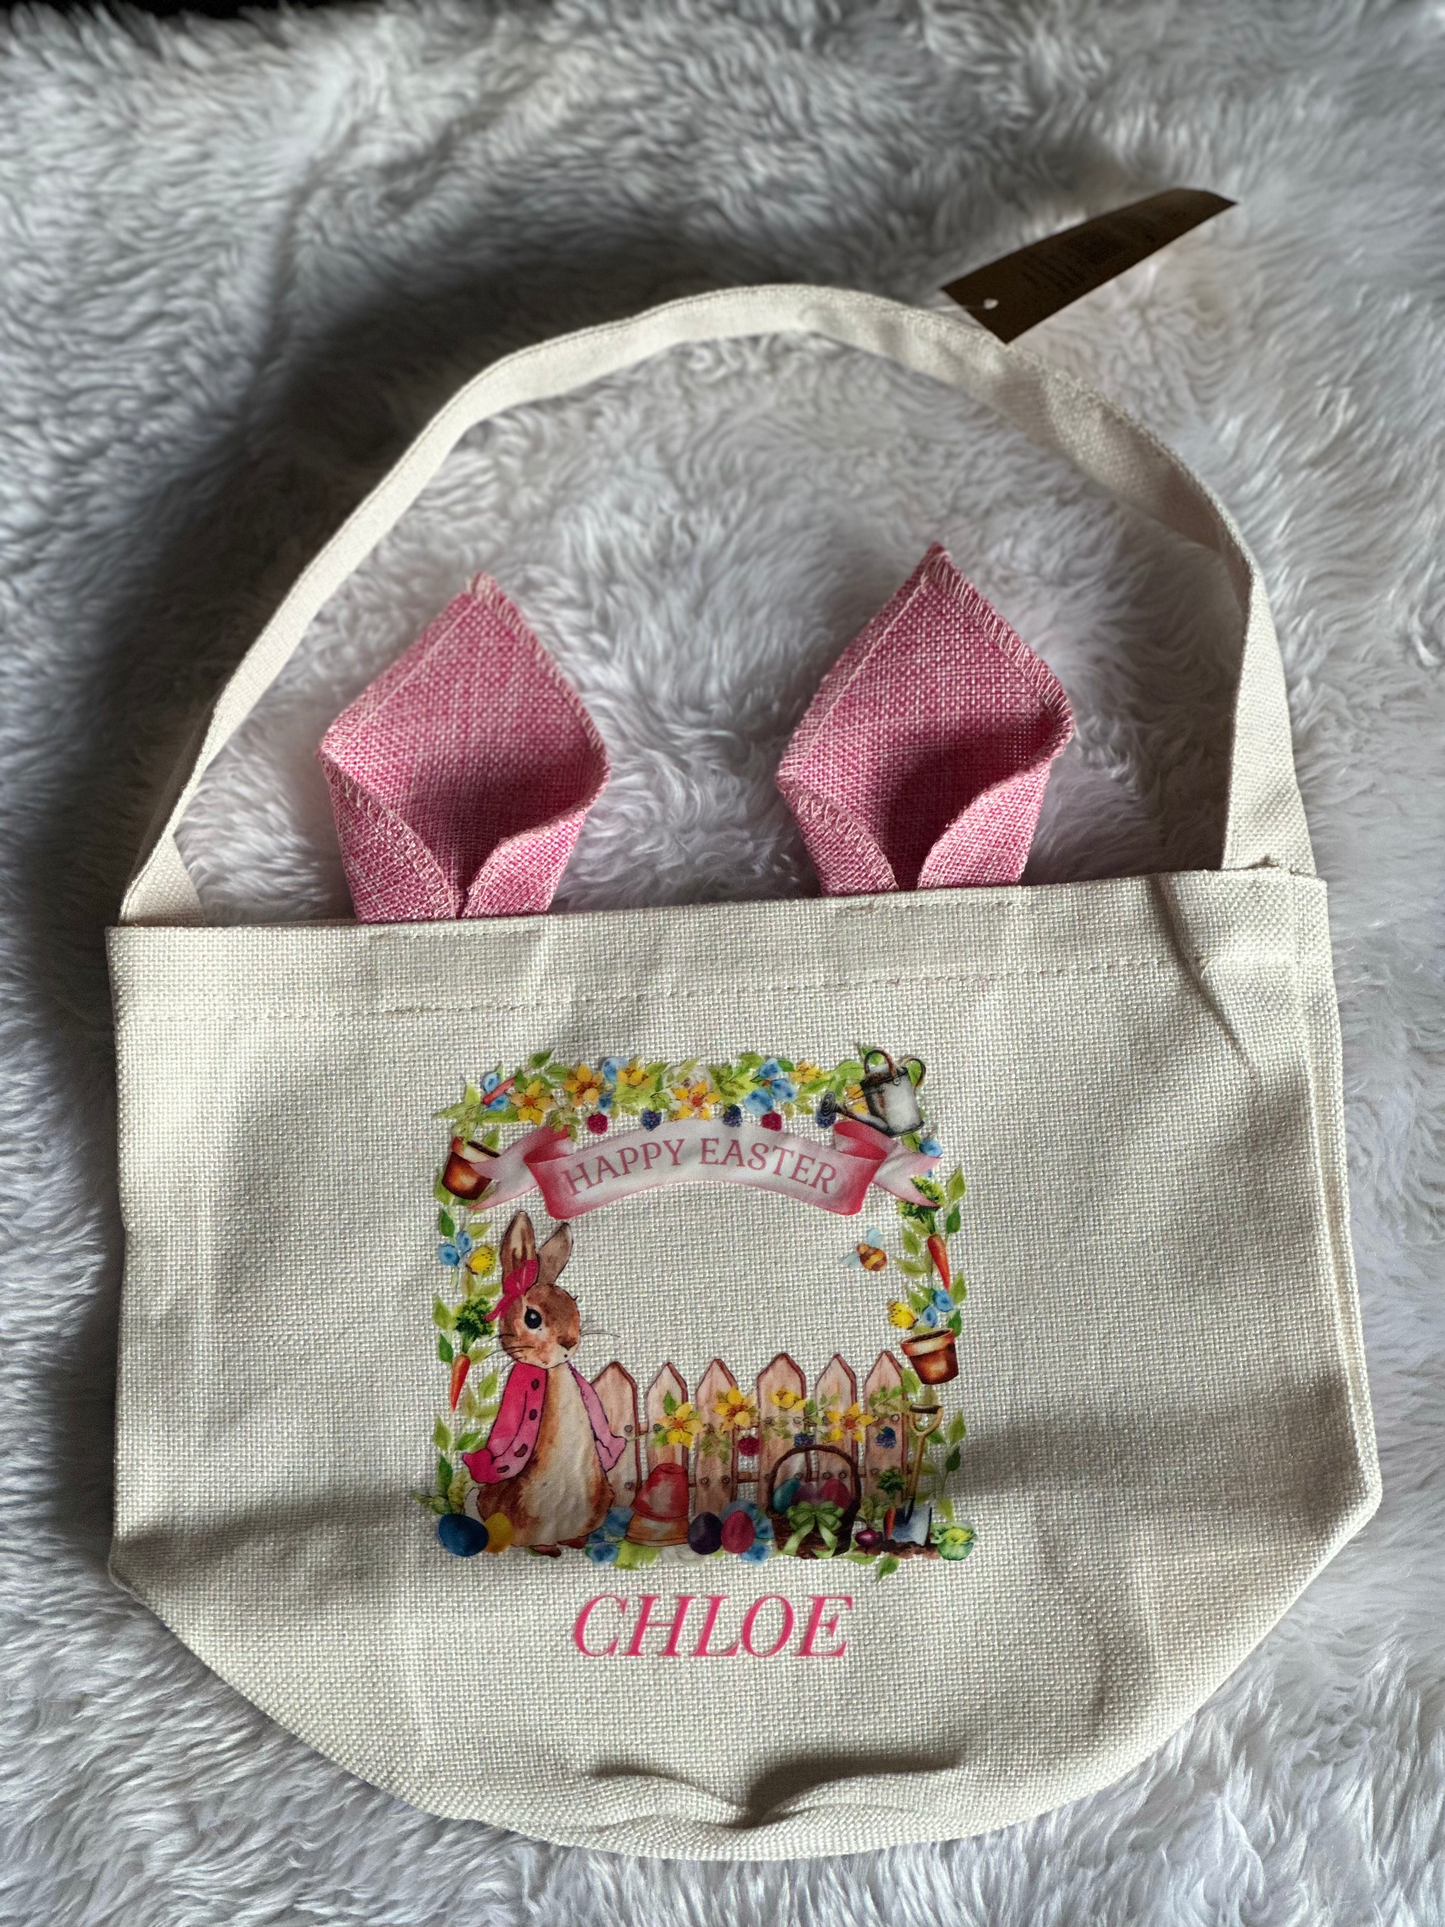 Stunning Personalise Easter Bunny Bags. Blue or Pink Ears